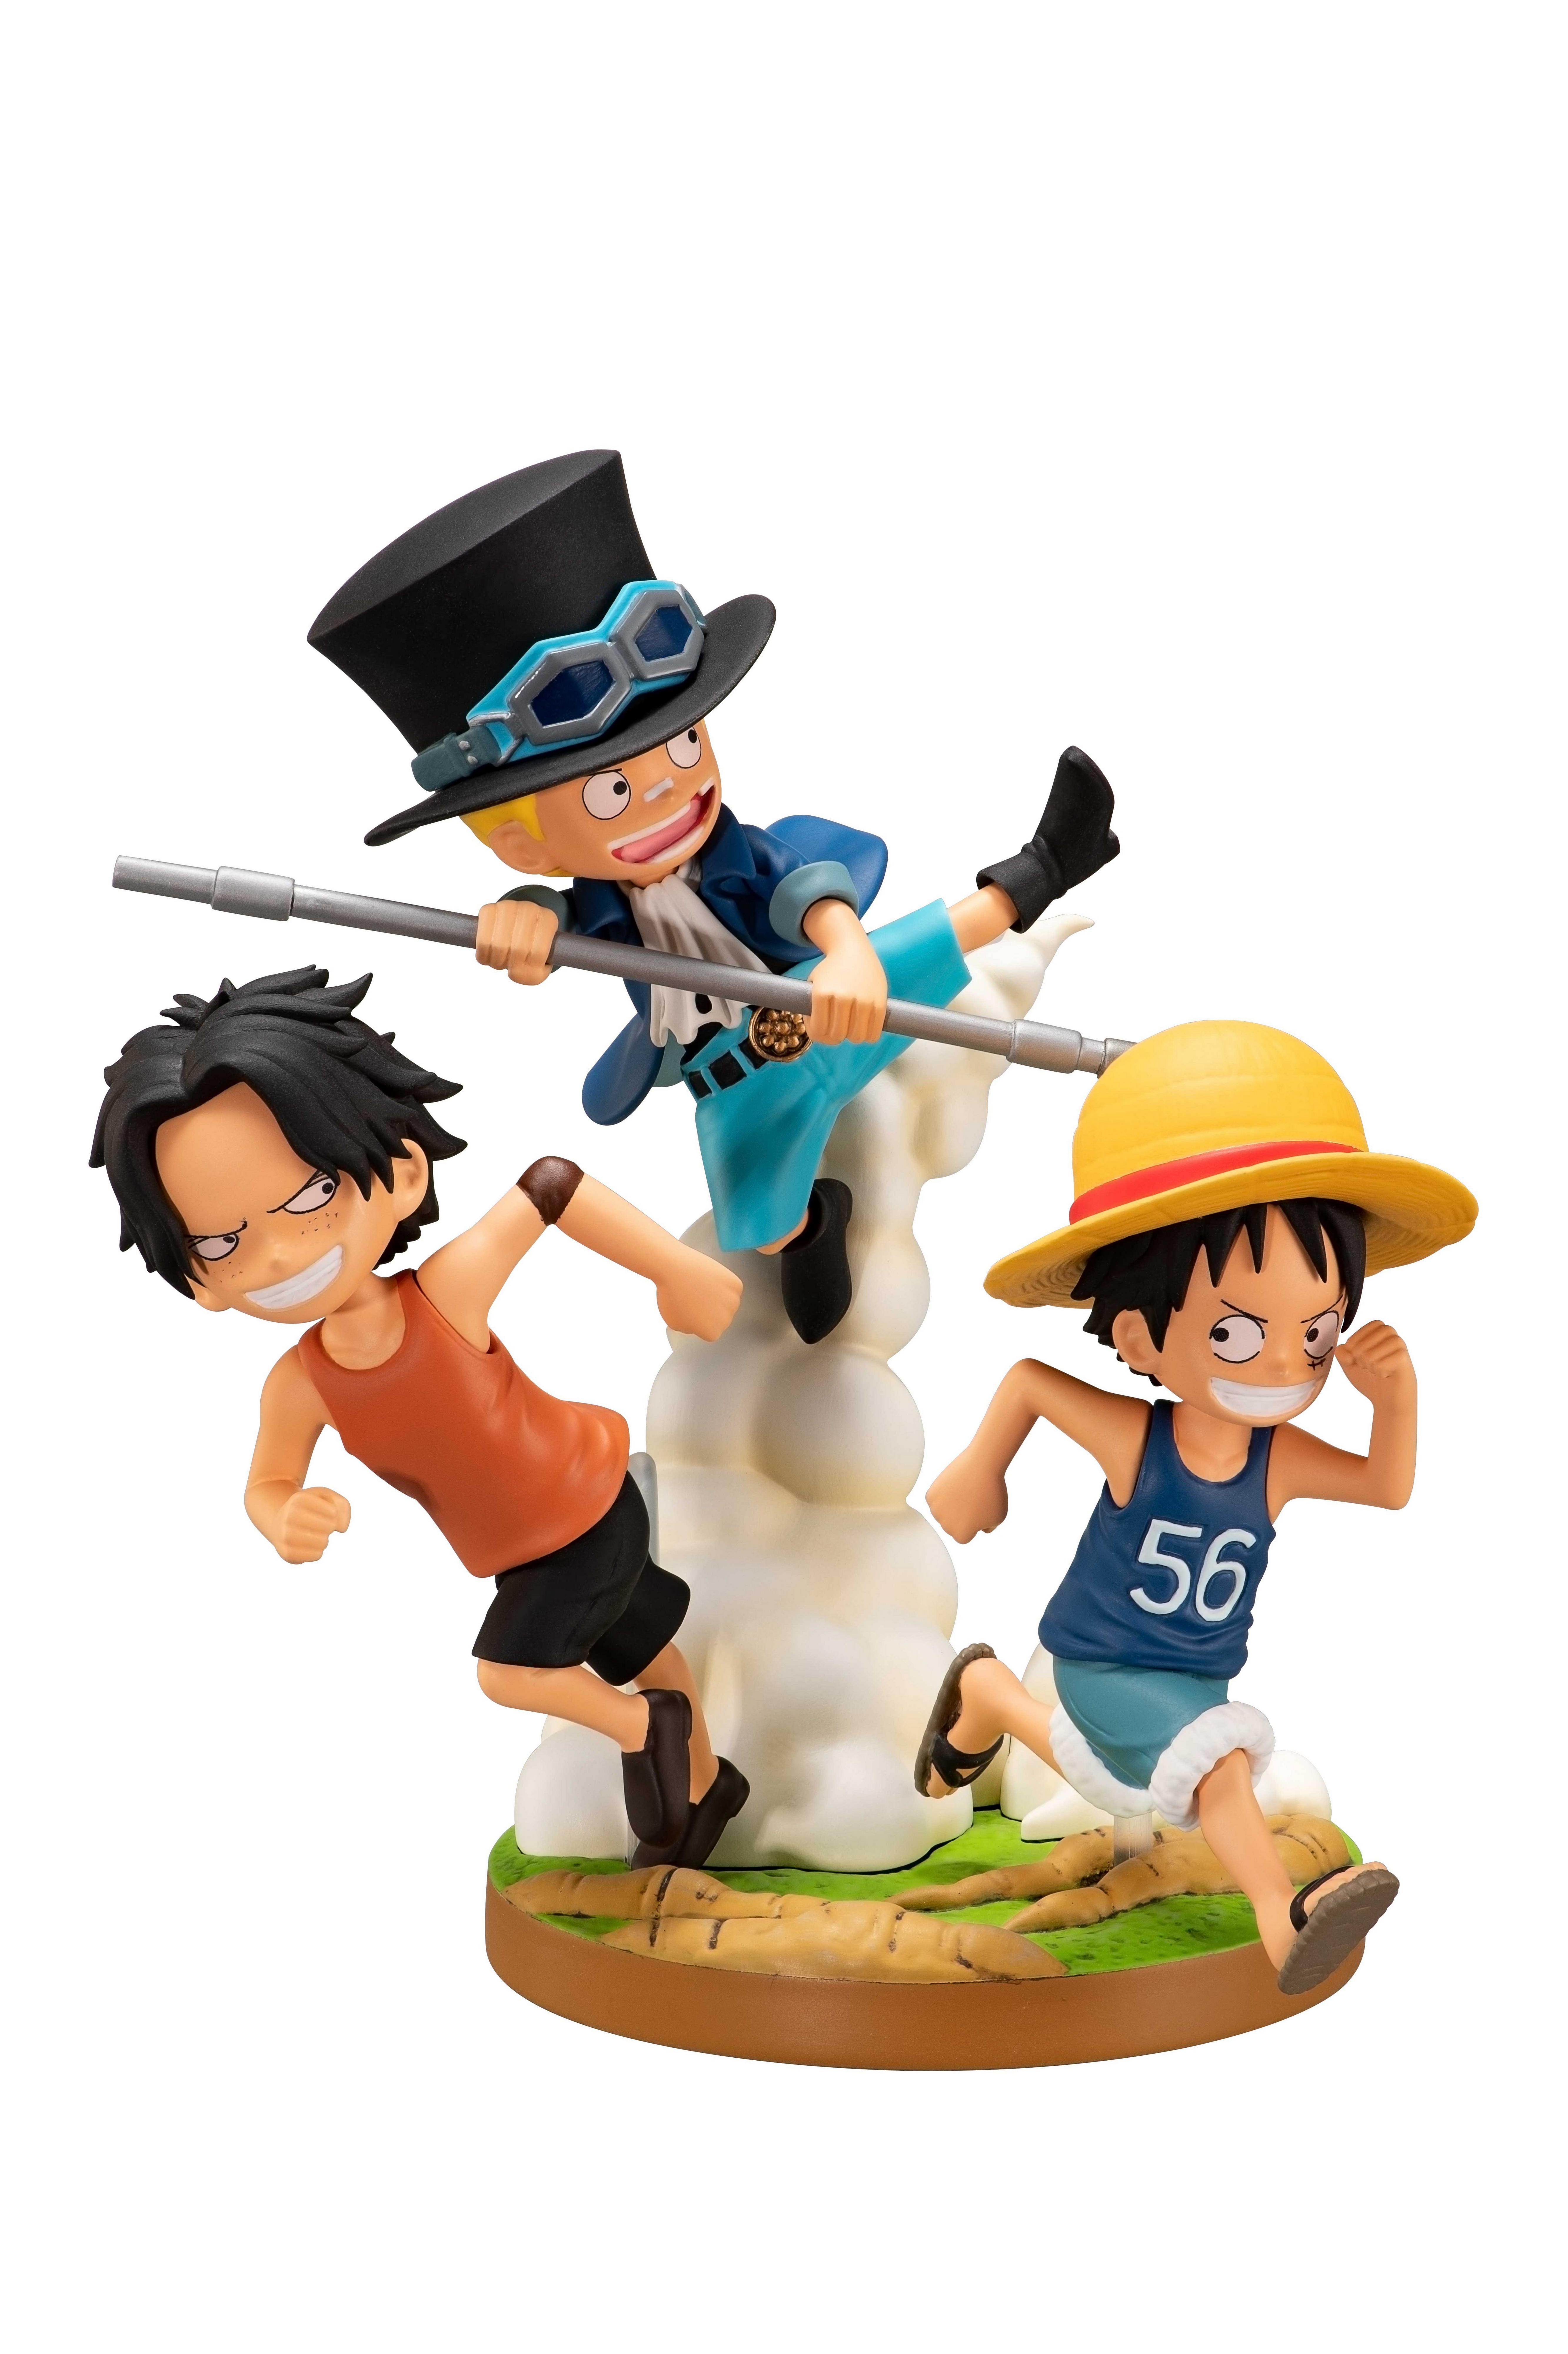 One Piece The Bond Of Three Brothers Kid Ace Luffy And Sabo The Bonds Of Brothers Ichiban Statue Gamestop